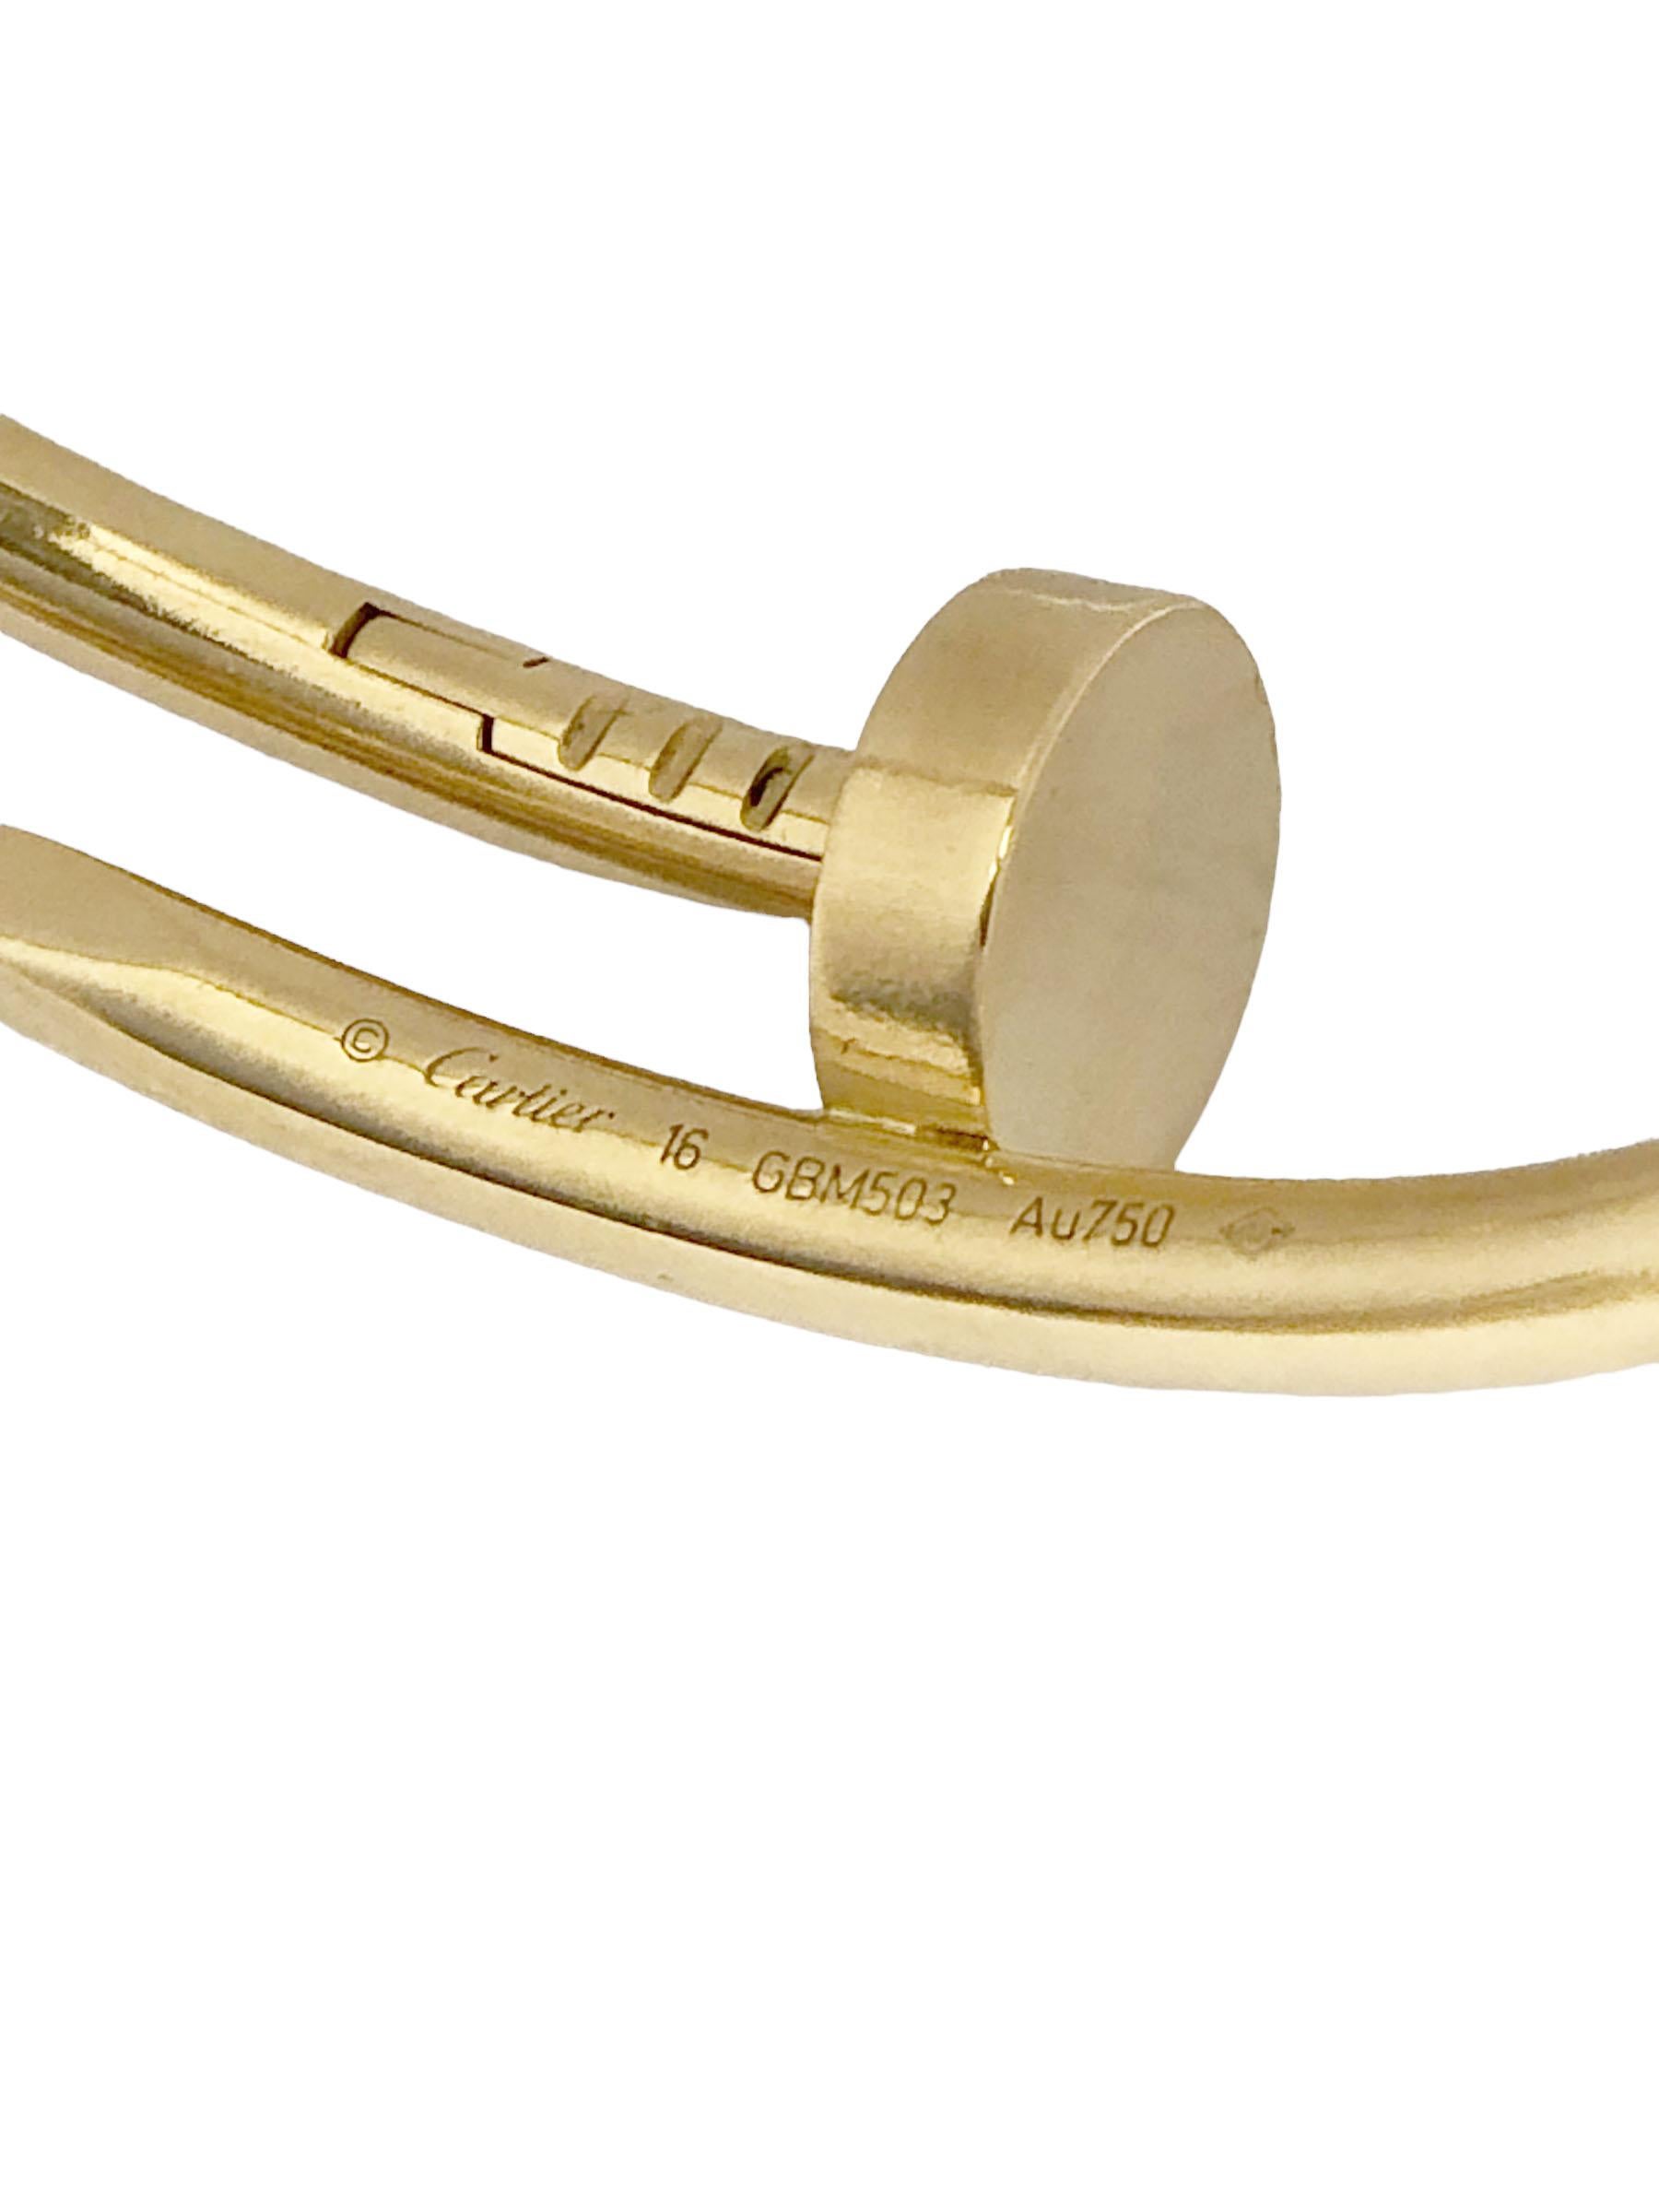 Circa 2014 Cartier Juste Un Clou 18K yellow Gold size 16 Nail Bracelet. Signed and Numbered and comes in original Cartier Suede travel pouch. 